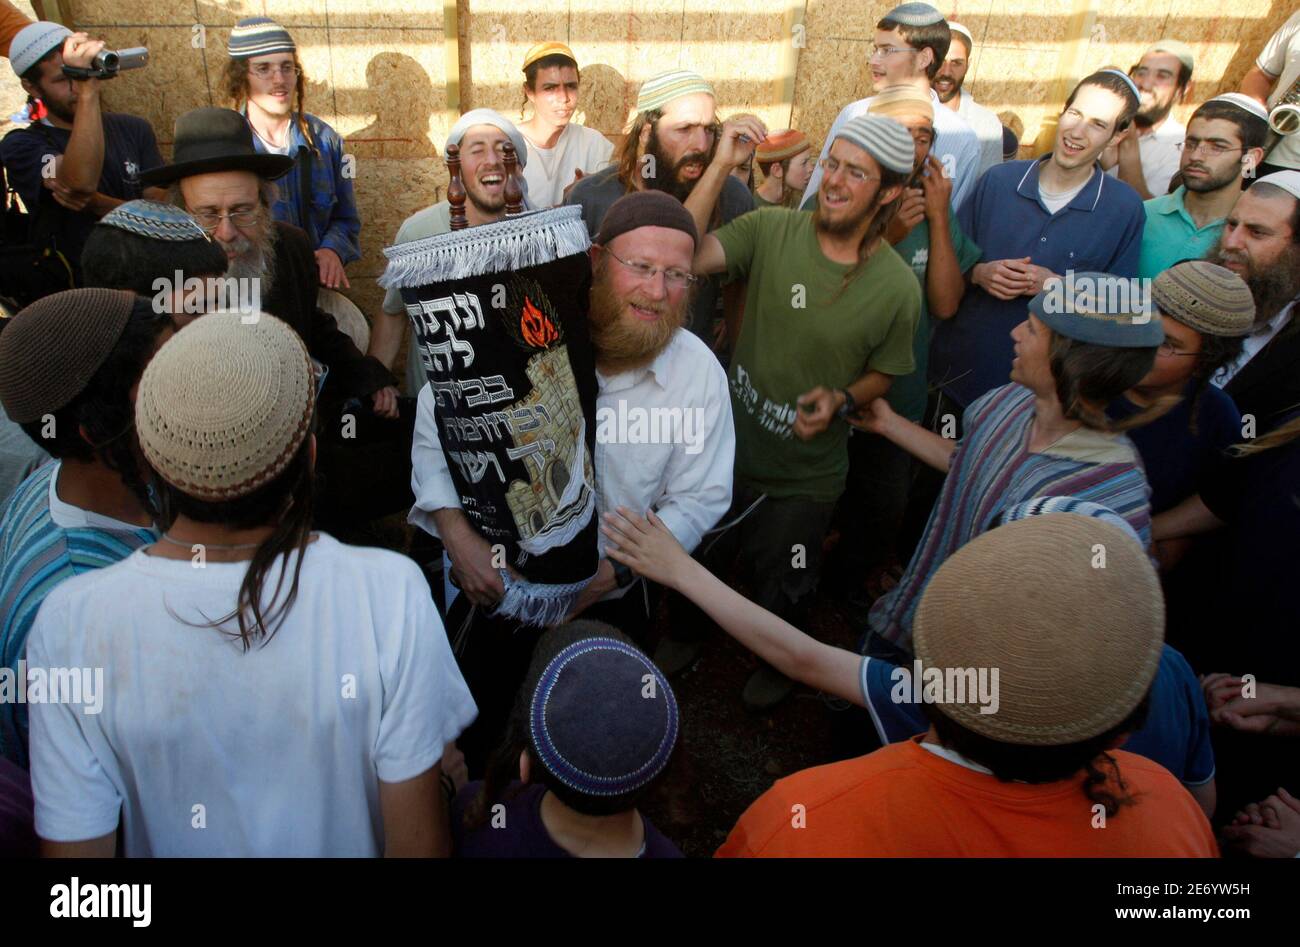 Jewish settlers gather around a torah scroll during the inauguration ceremony of a makeshift synagogue in the unauthorised outpost of Maoz Esther near the Jewish settlement of Kokhav Hashahar, northeast of the West Bank city of Ramallah June 4, 2009, after Israeli authorities demolished similar structures at the outpost on Wednesday. REUTERS/Baz Ratner (WEST BANK POLITICS) Stock Photo